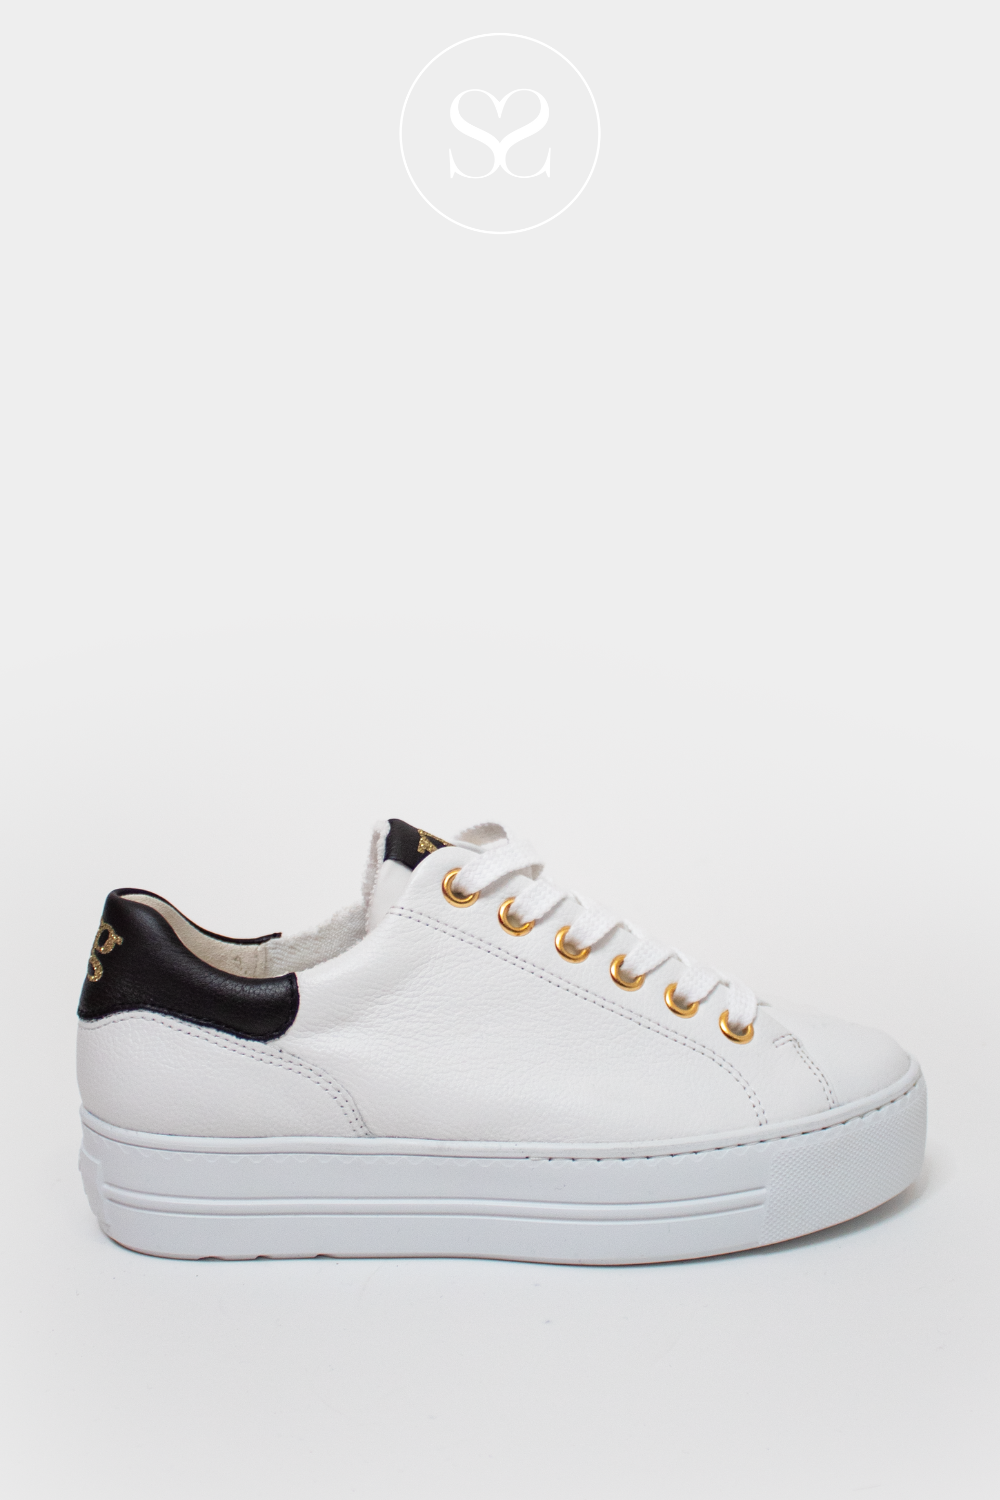 WHITE PAUL GREEN TRAINERS WITH BLACK TRIM FOR WOMEN